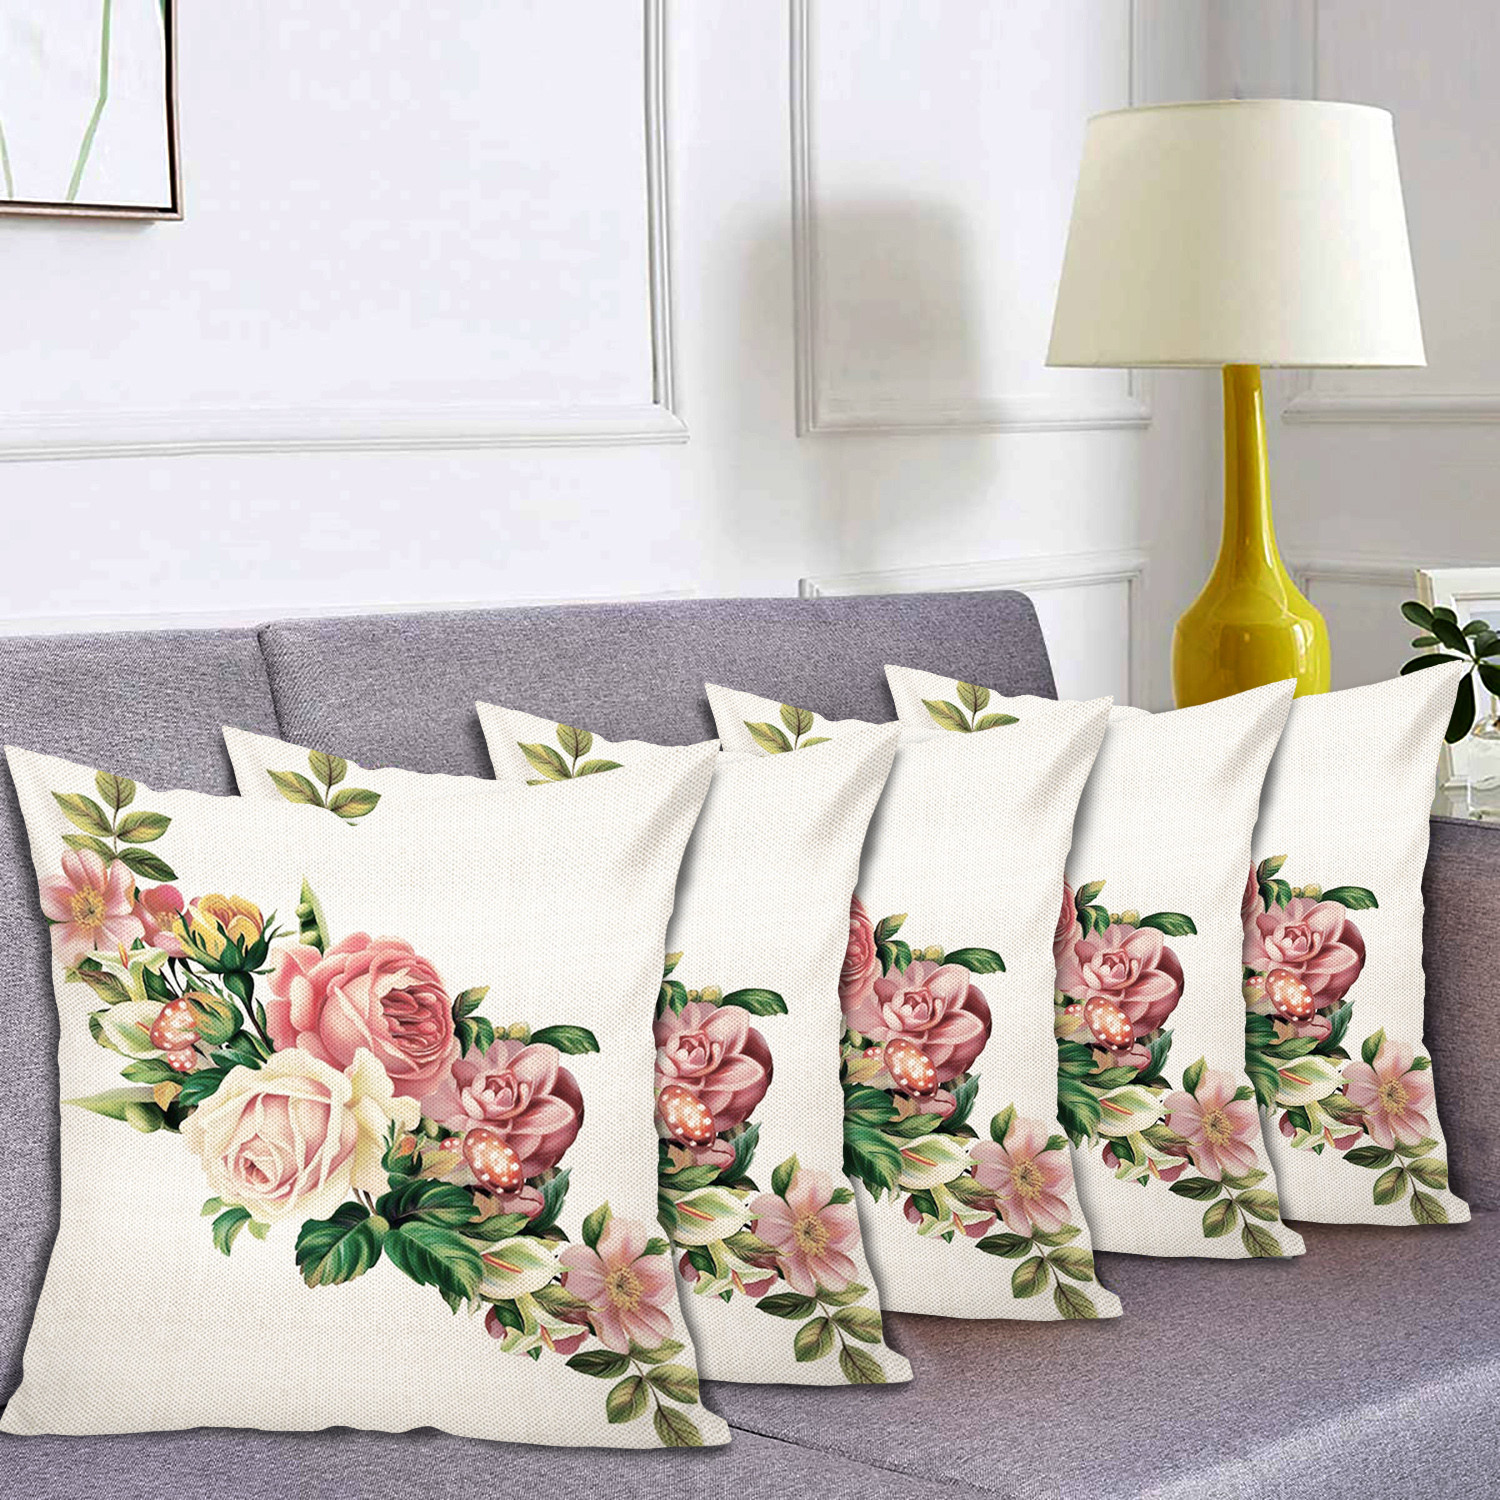 Kuber Industries Flower Print Soft Decorative Square Cushion Cover, Cushion Case For Sofa Couch Bed 16x16 Inch- (White)